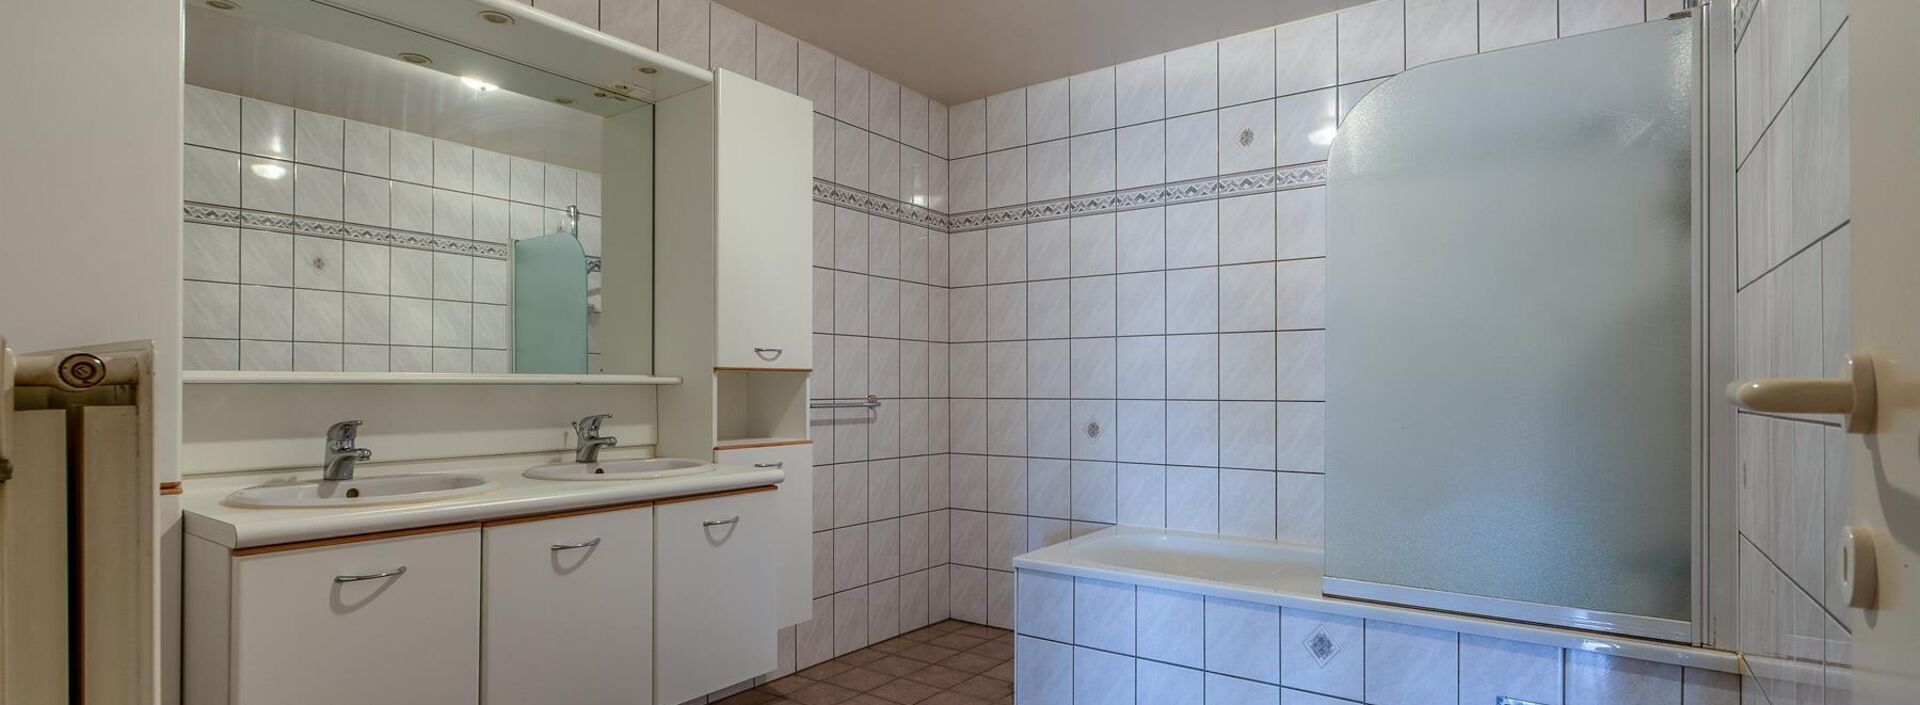 Appartement te huur in Herenthout